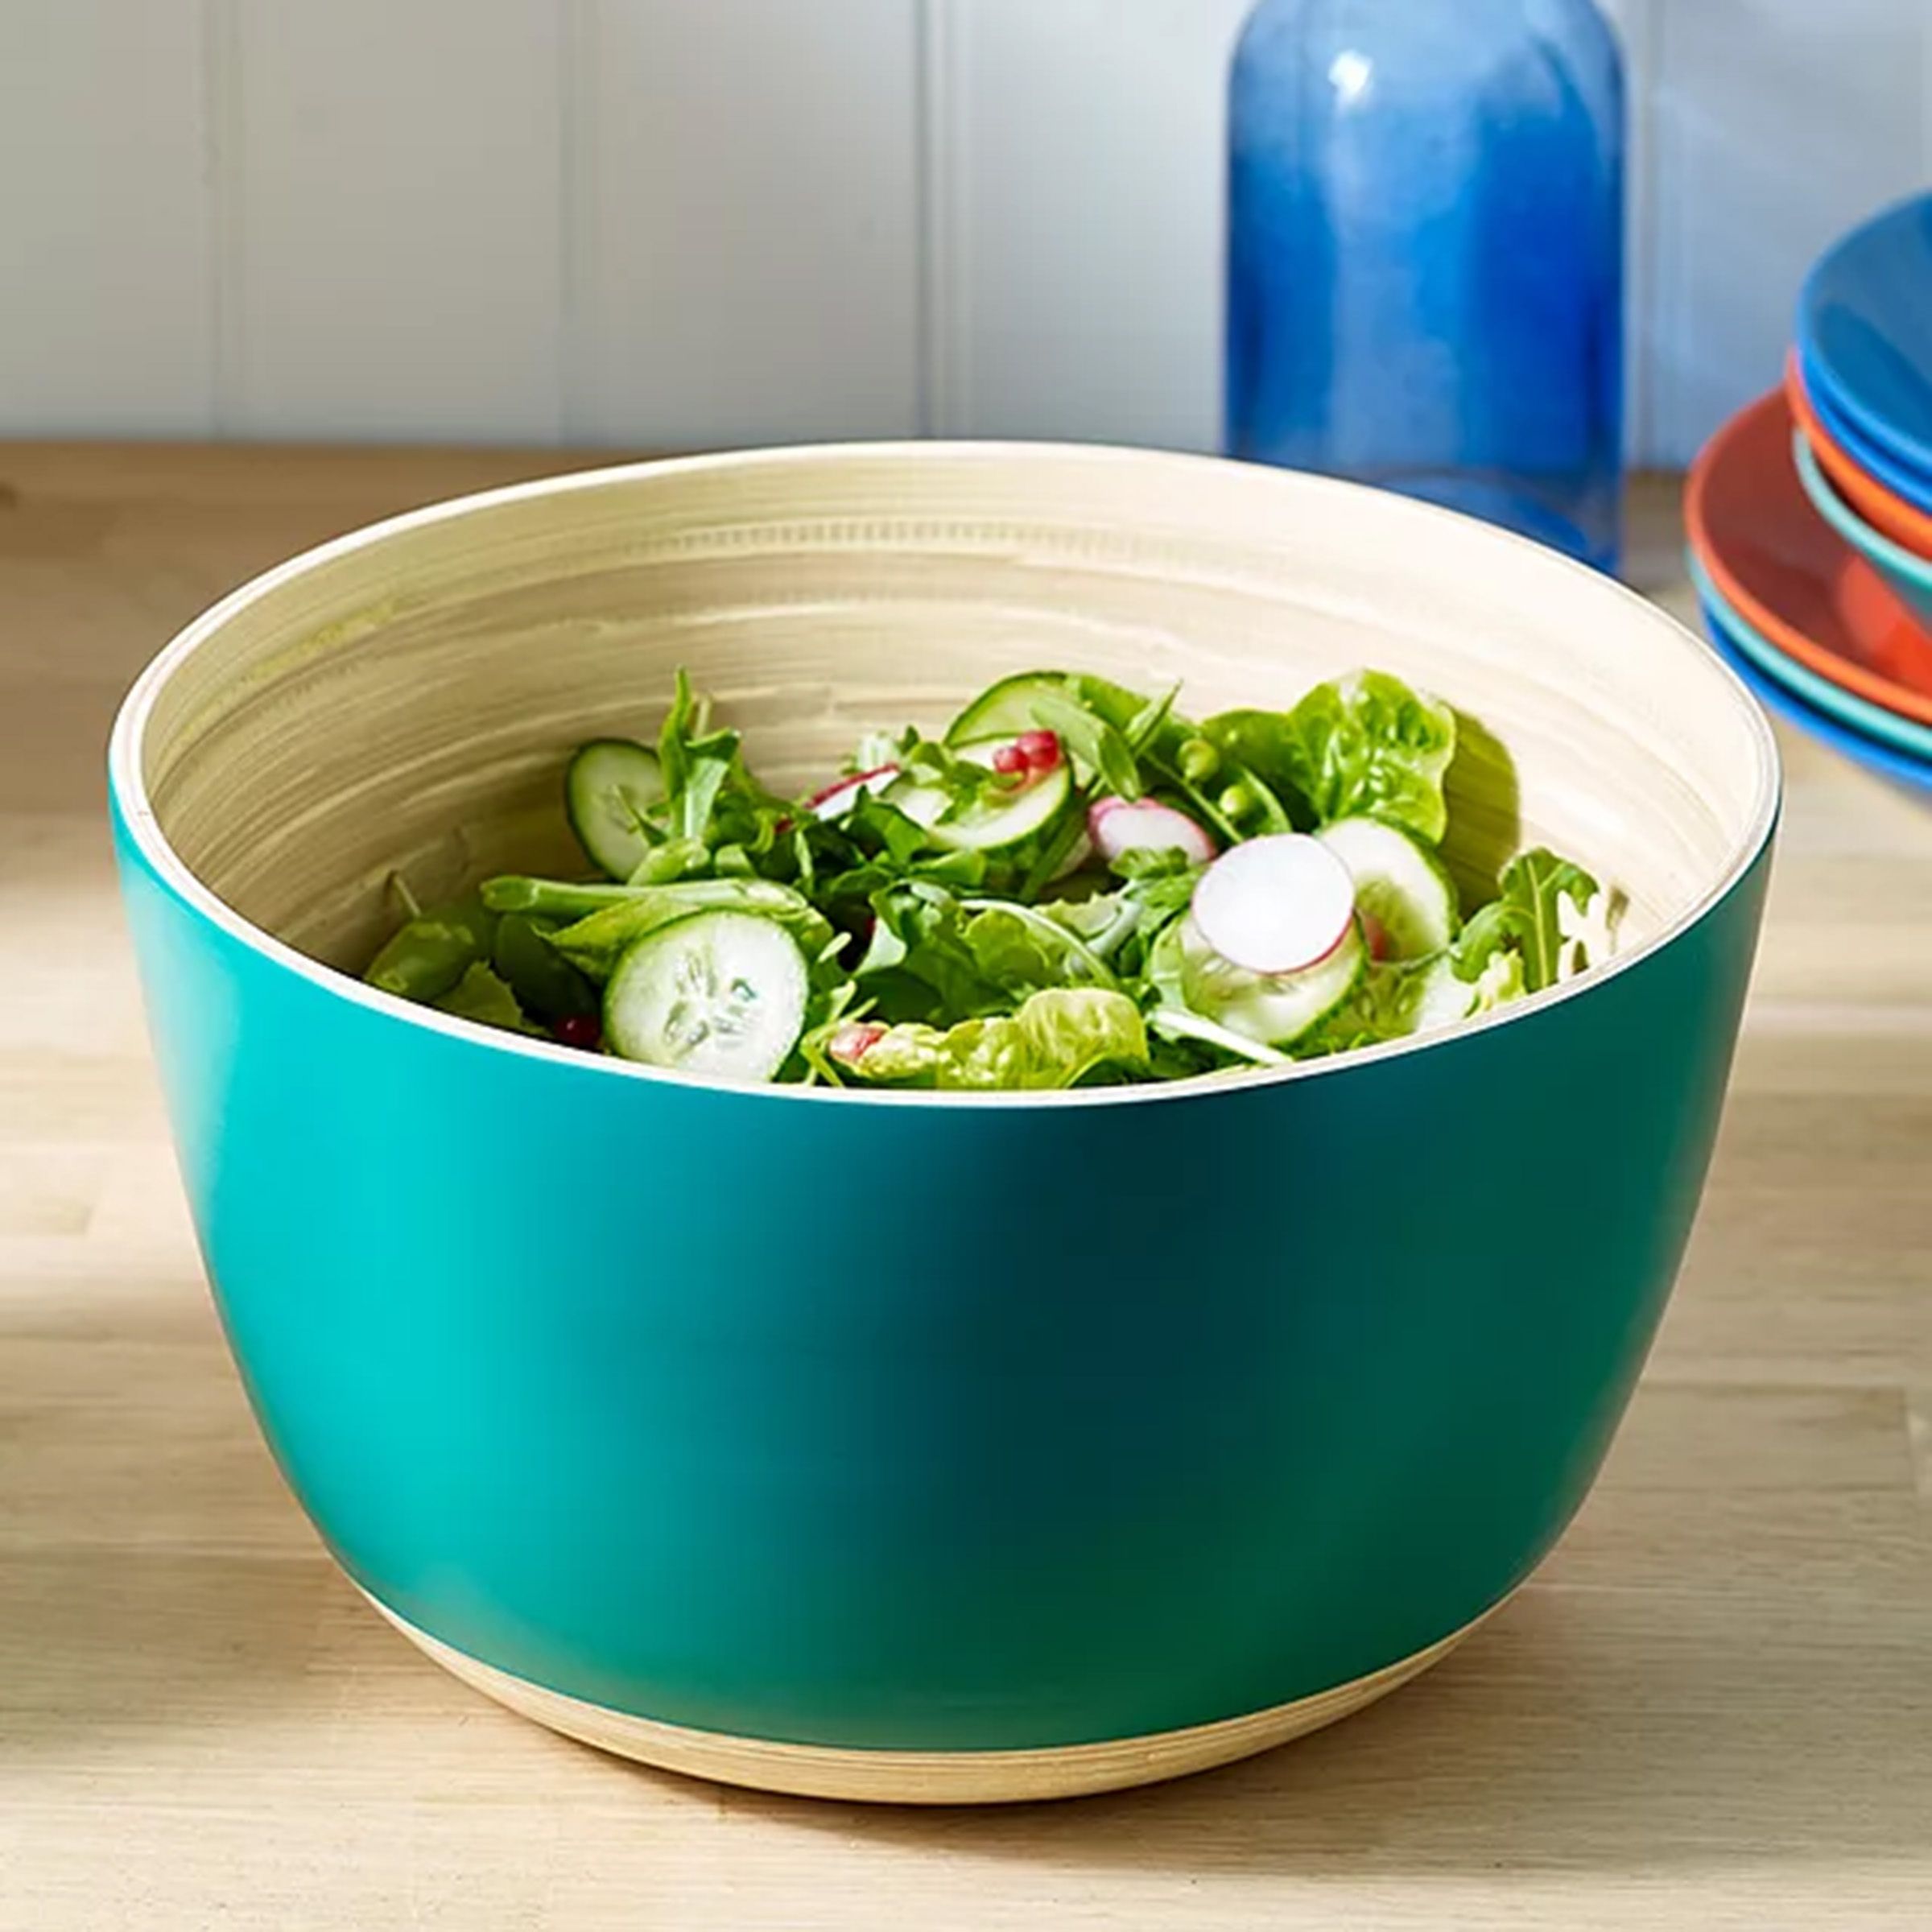 Blue salad bowl with salad in.